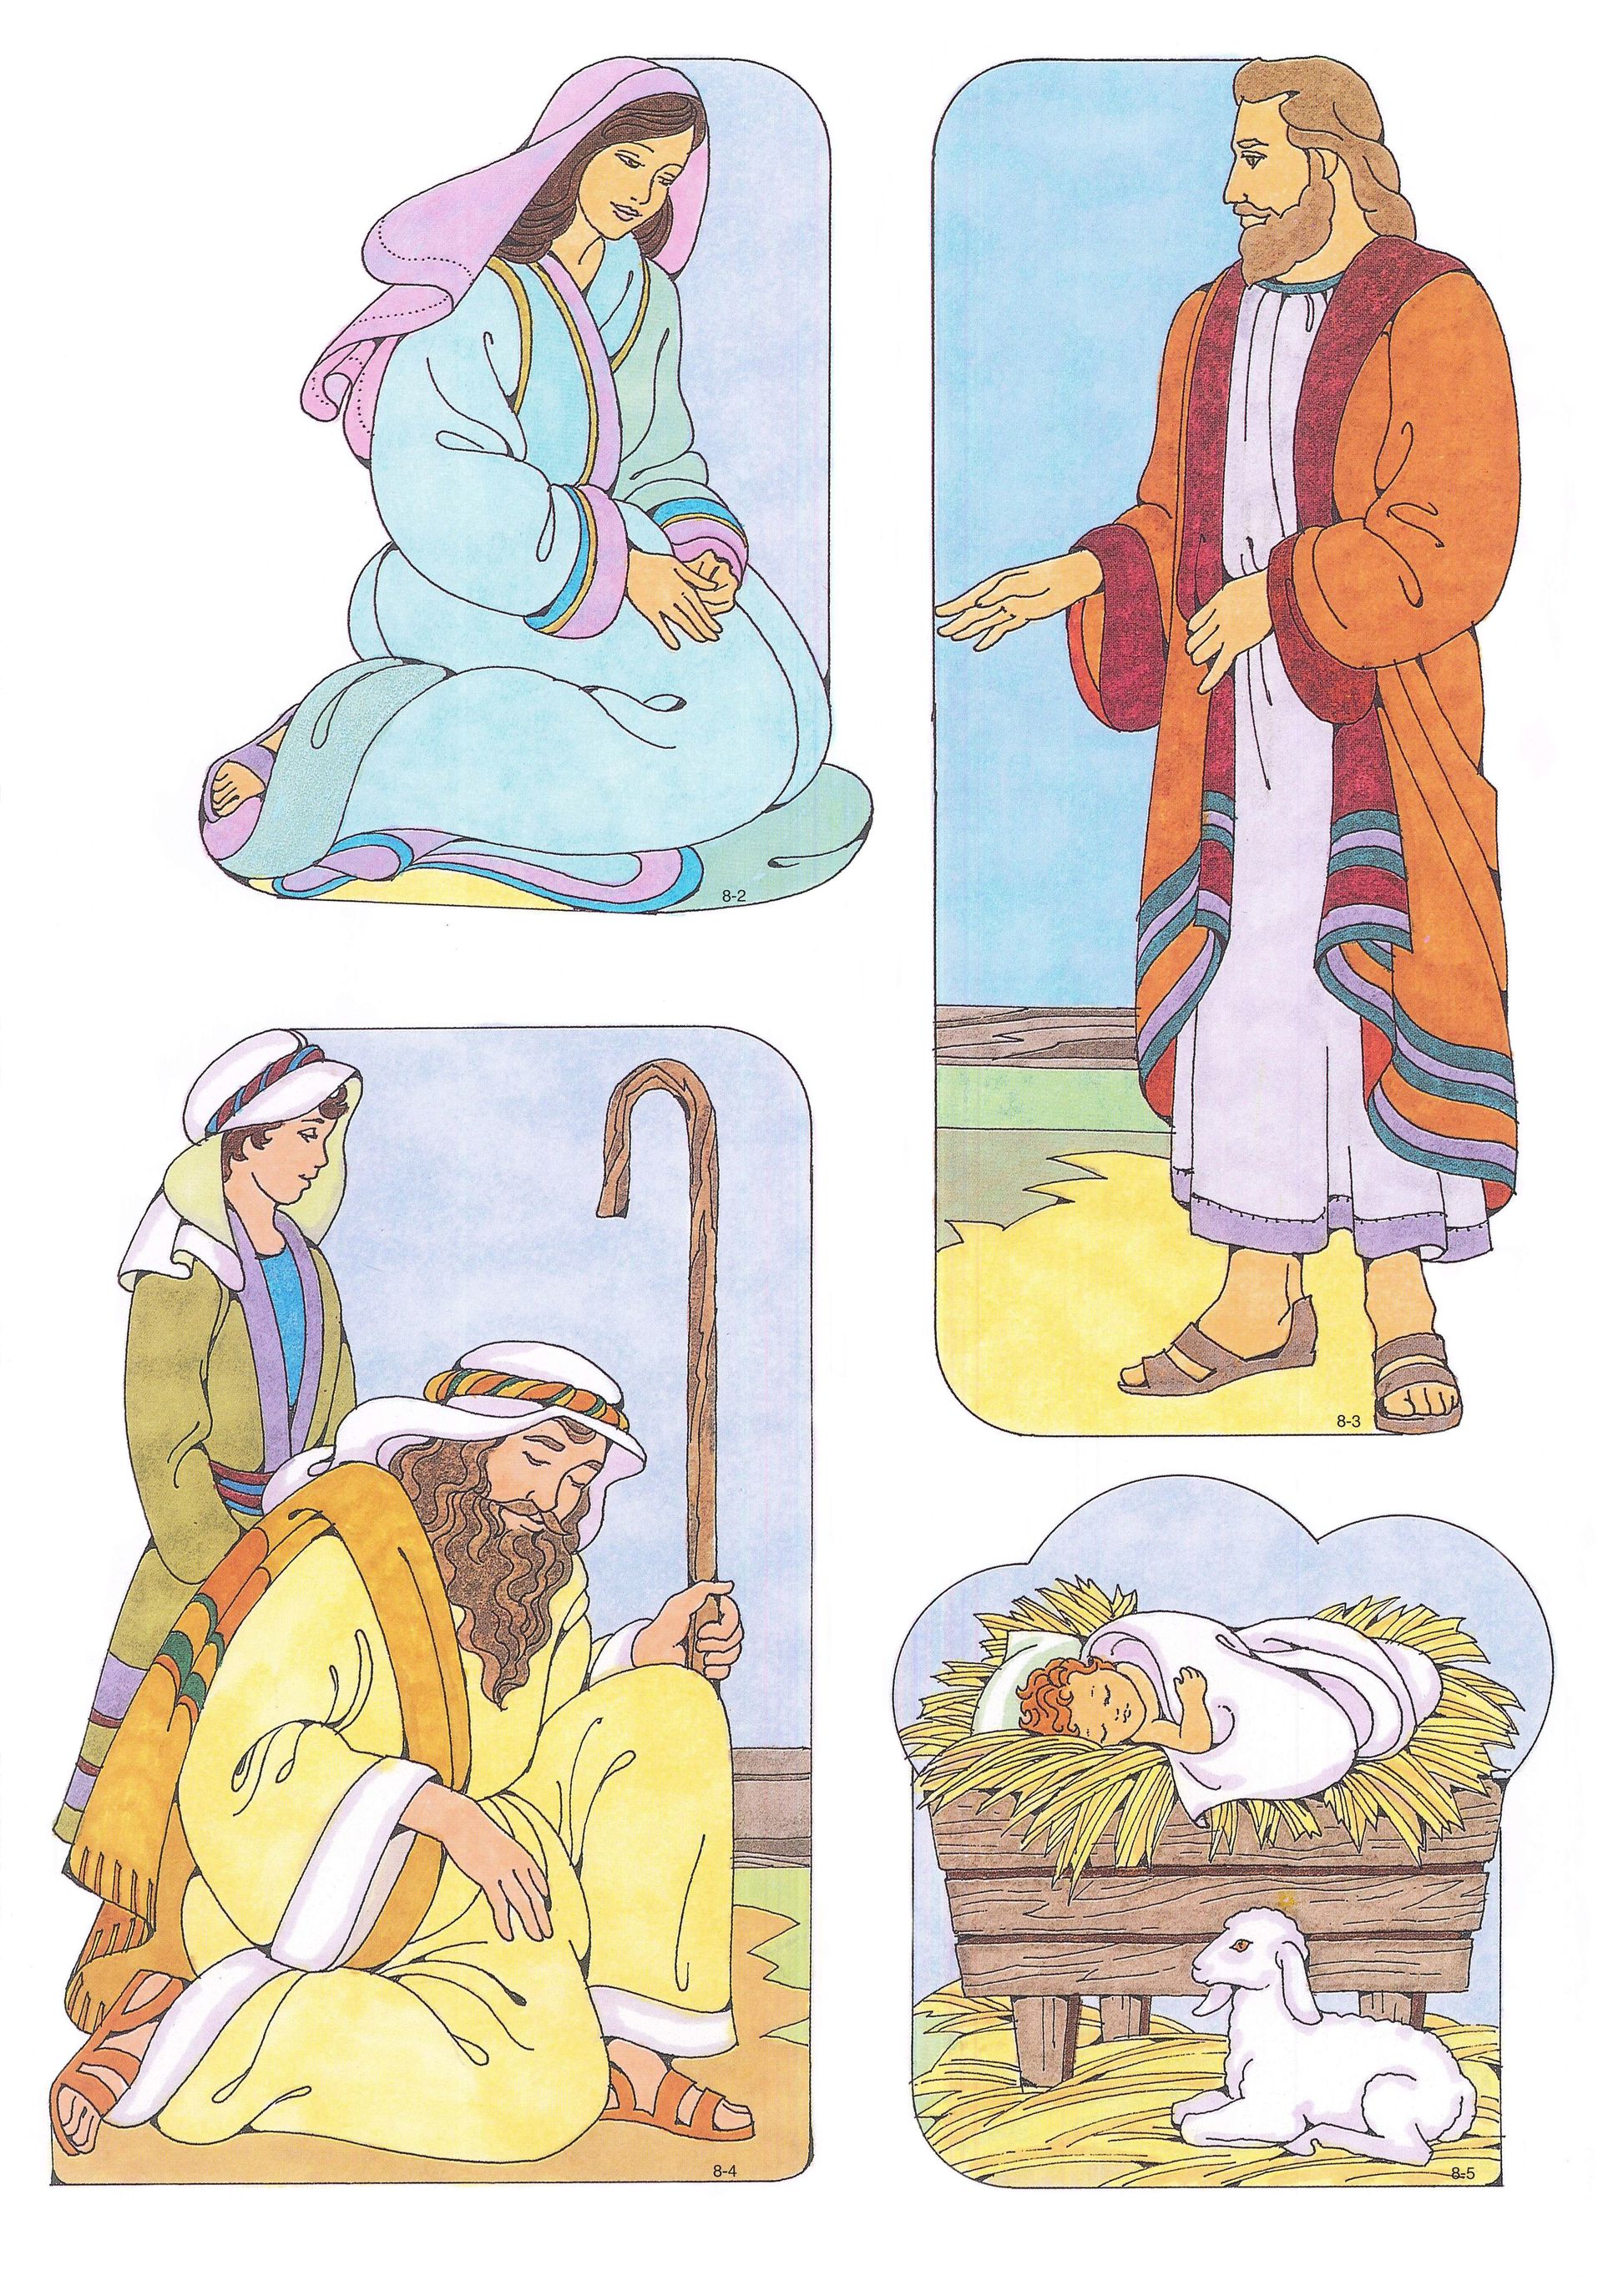 Primary Visual Aids: Cutouts 8-2 Mary; 8-3 Joseph; 8-4 Shepherds; 8-5 Baby Jesus in a Manger and a Lamb by the Manger.